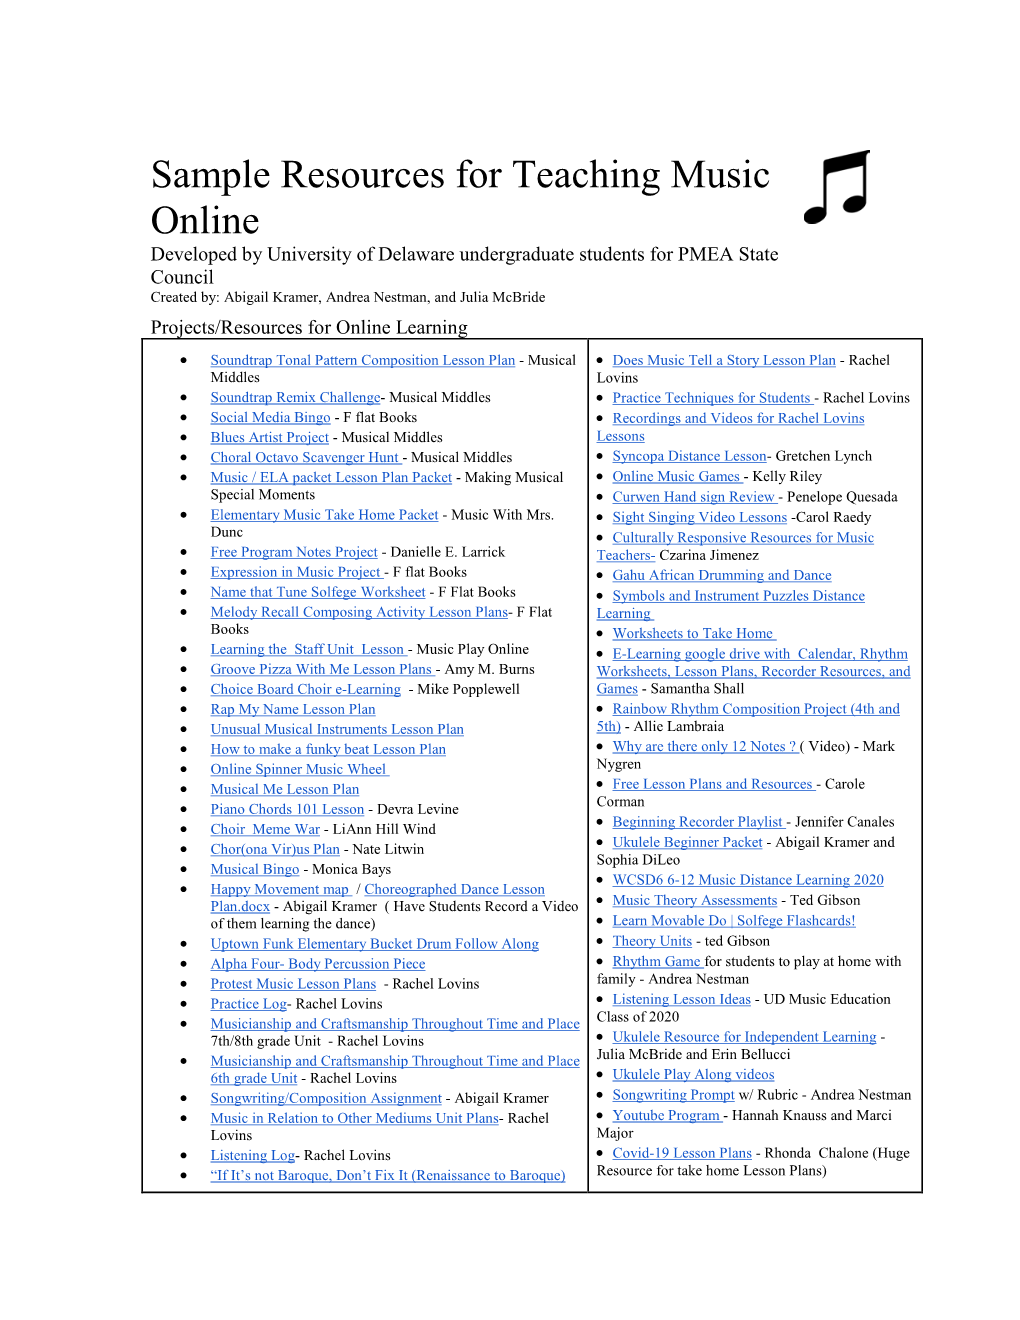 Sample Resources for Teaching Music Online